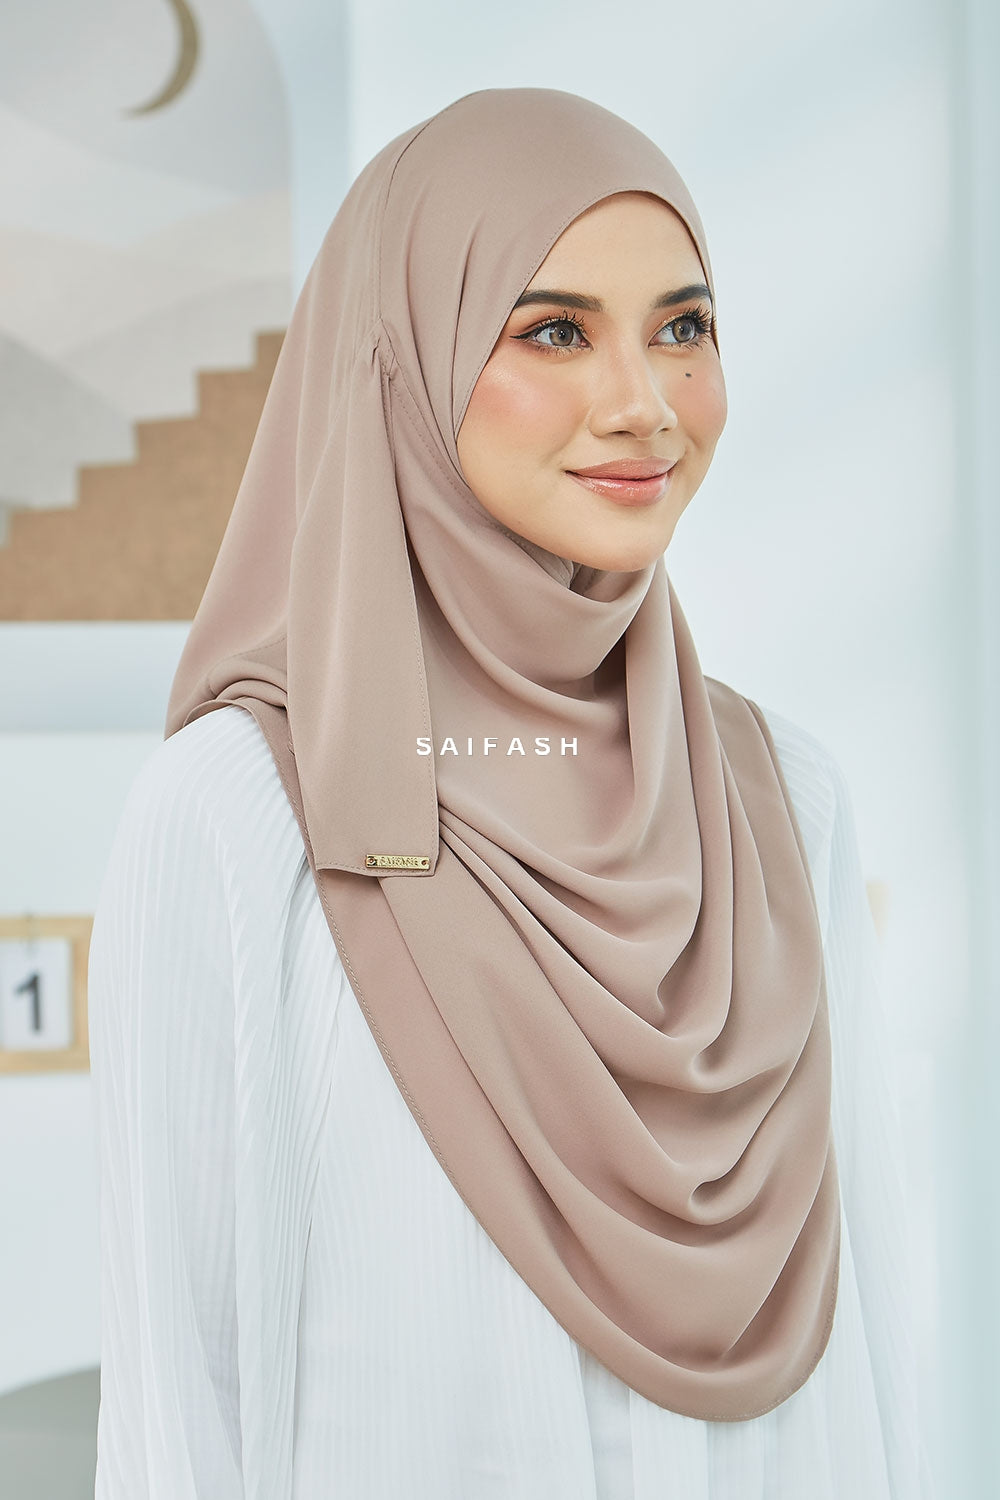 Aralyn Babes Instant Hijab in Milo